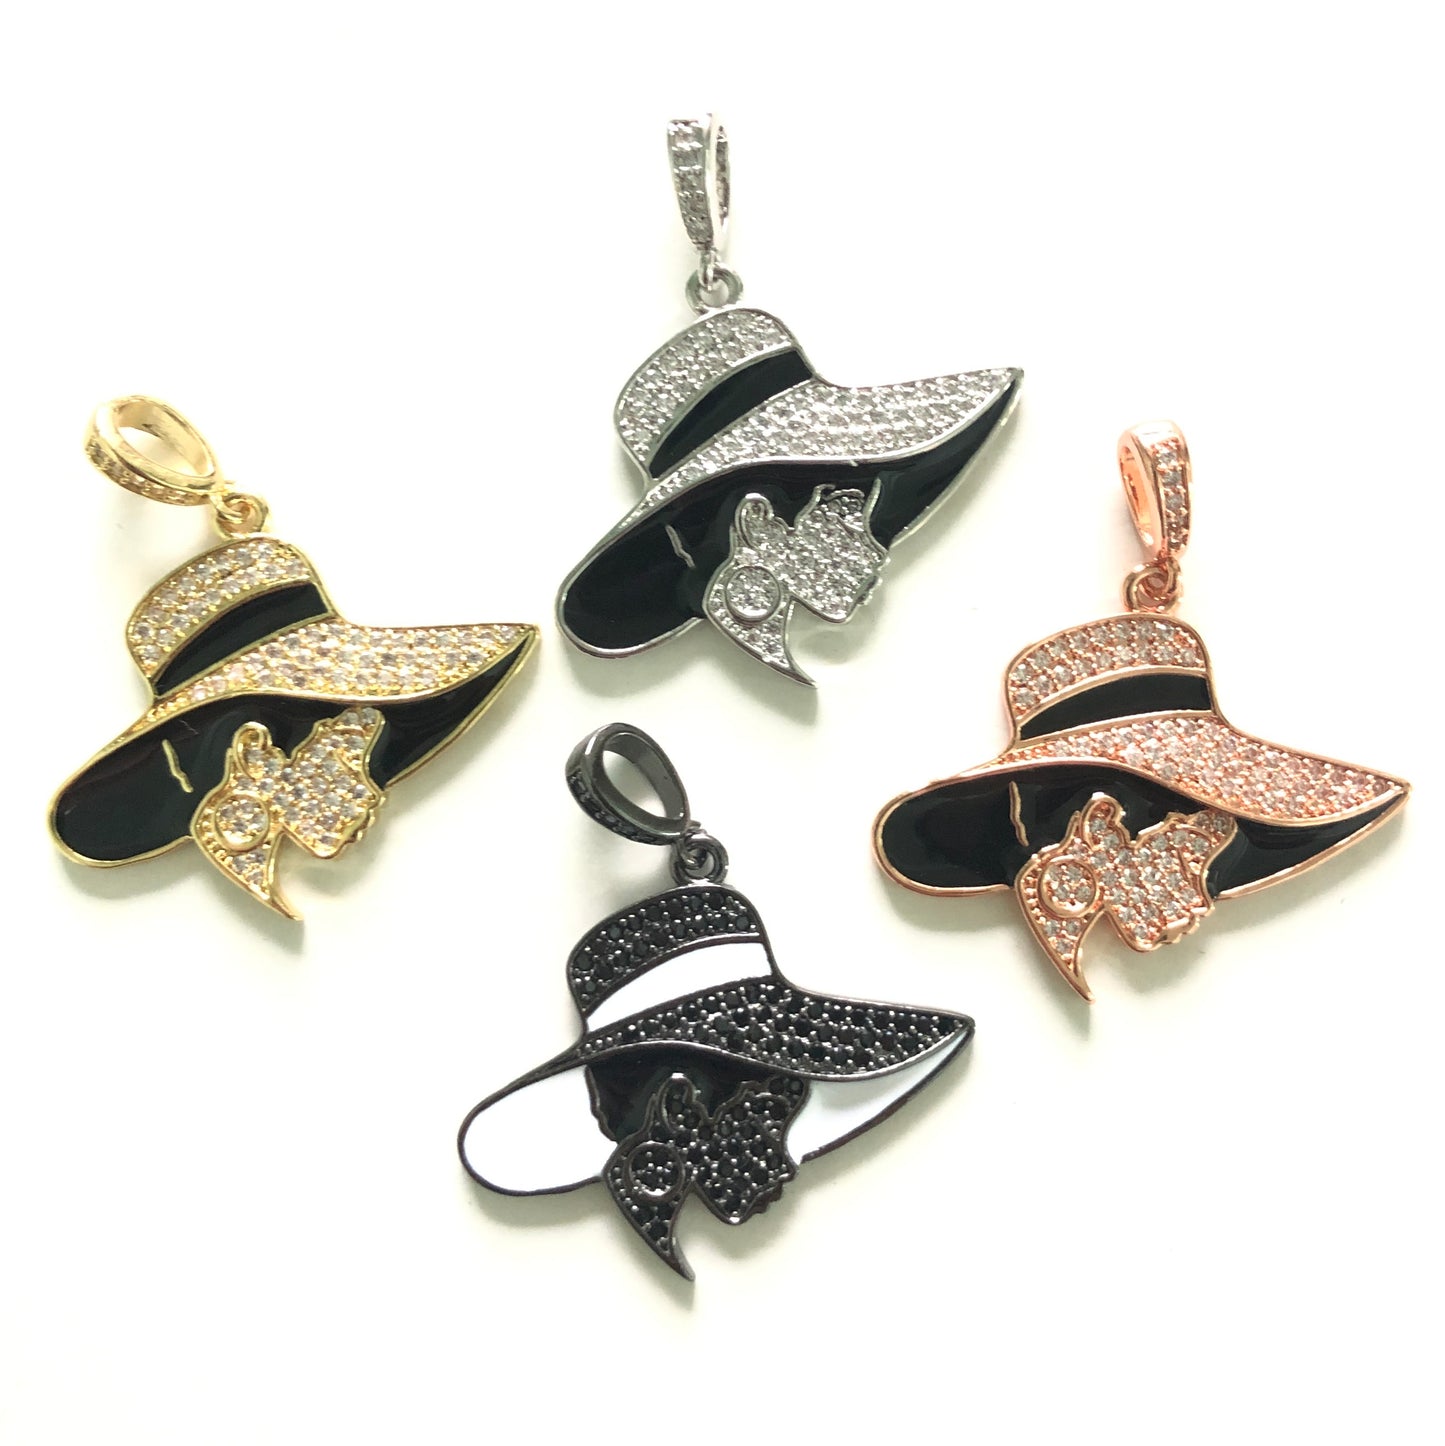 10pcs/lot 34*28mm CZ Afro Girl Lady in Hat Charms CZ Paved Charms Afro Girl/Queen Charms Charms Beads Beyond